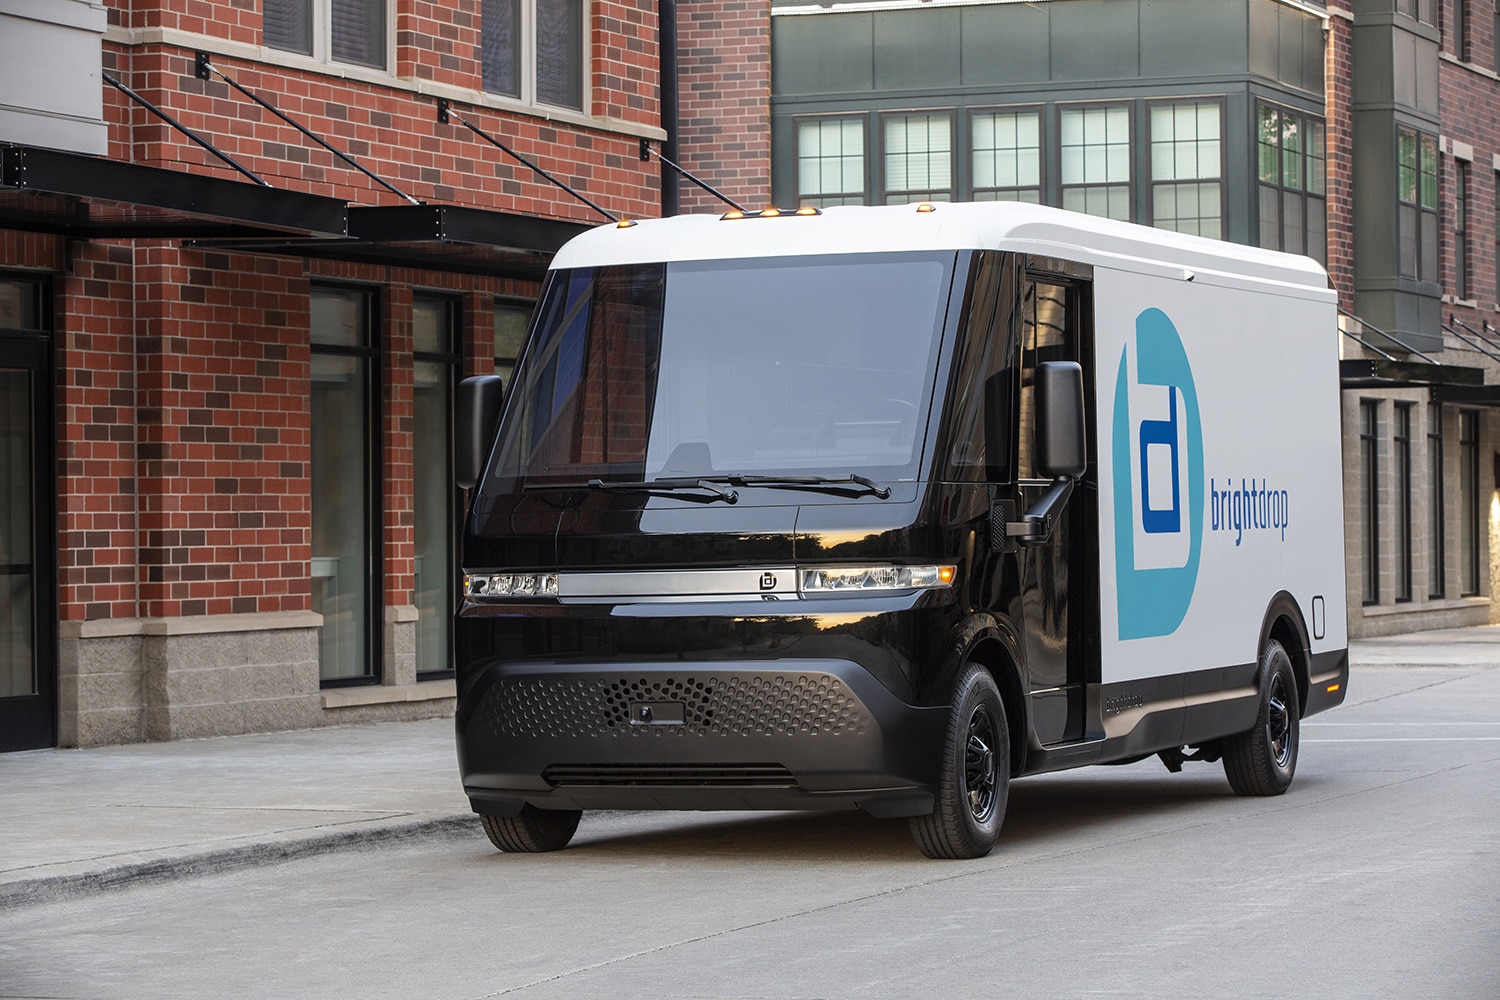 The BrightDrop EV600 is an all-electric light commercial vehicle, purpose-built for the delivery of goods and services over long ranges.